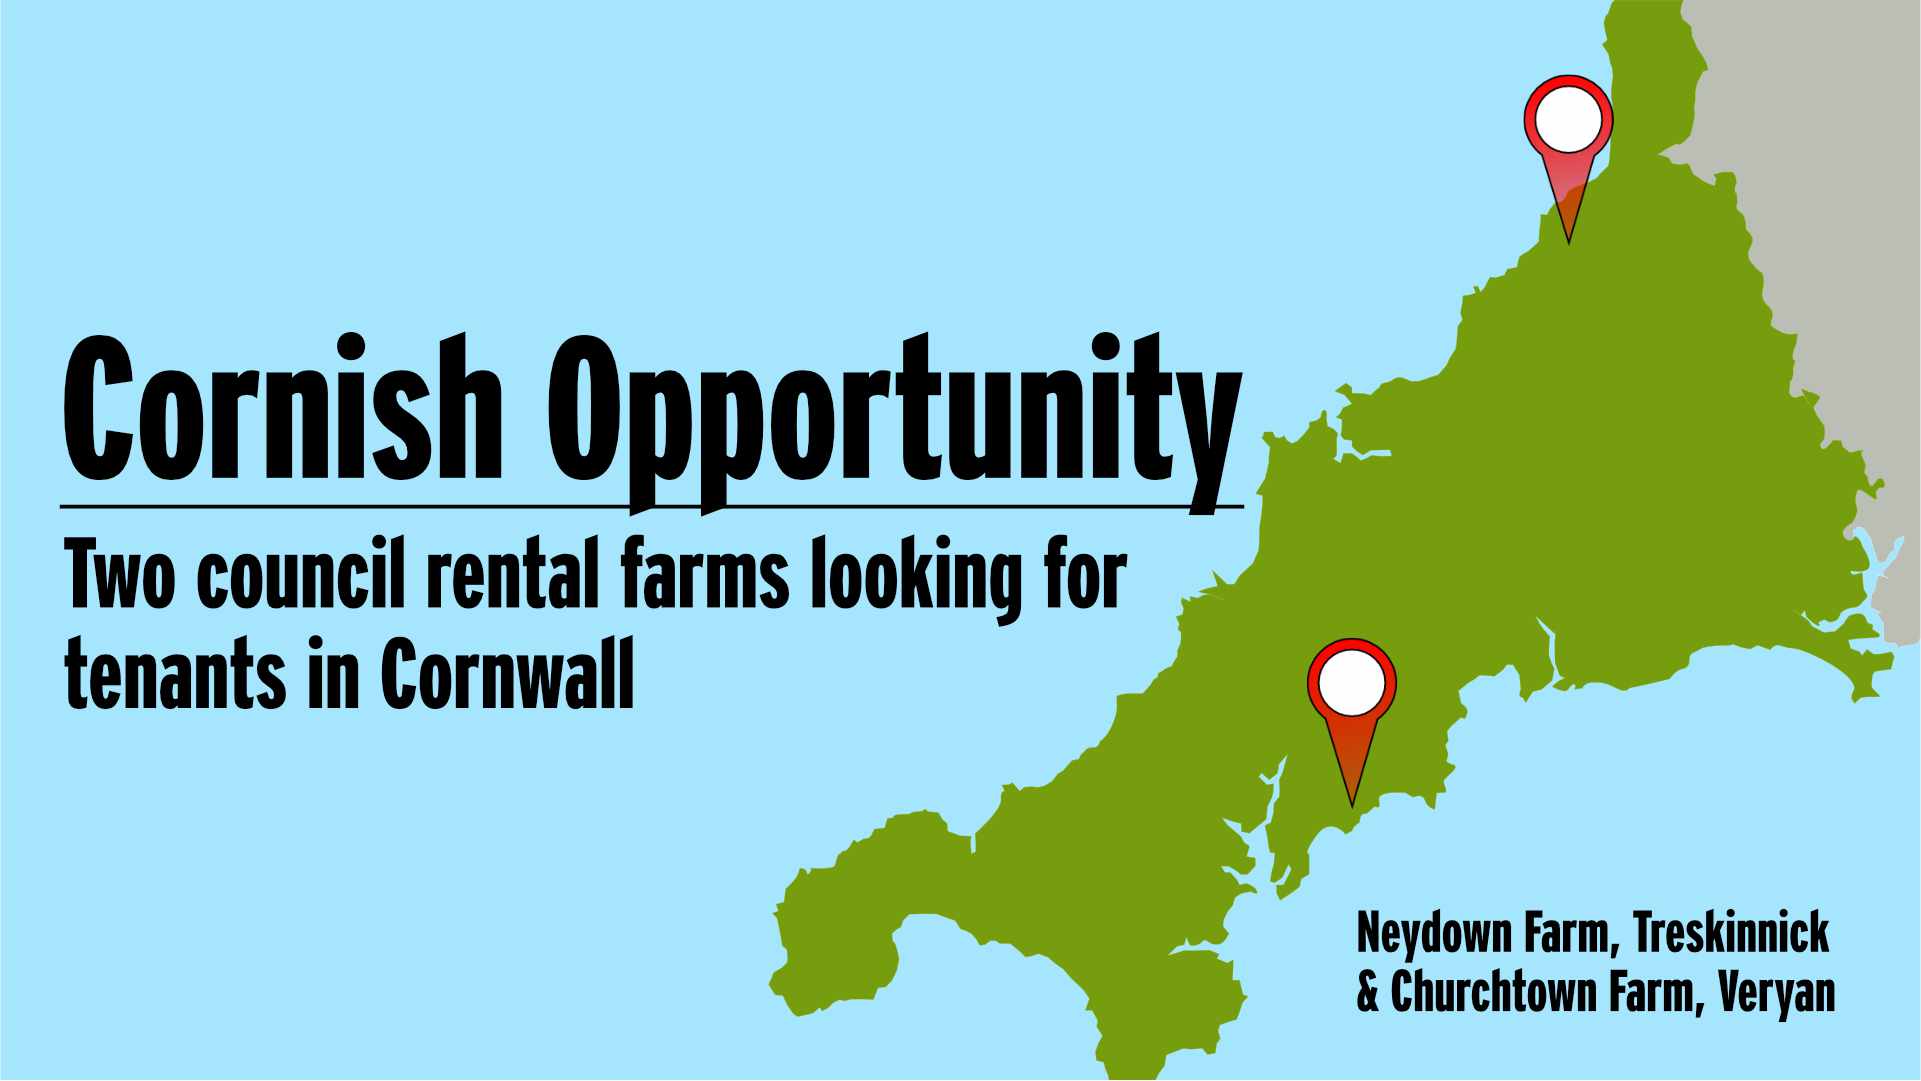 Two council rental farms looking for tenants in Cornwall